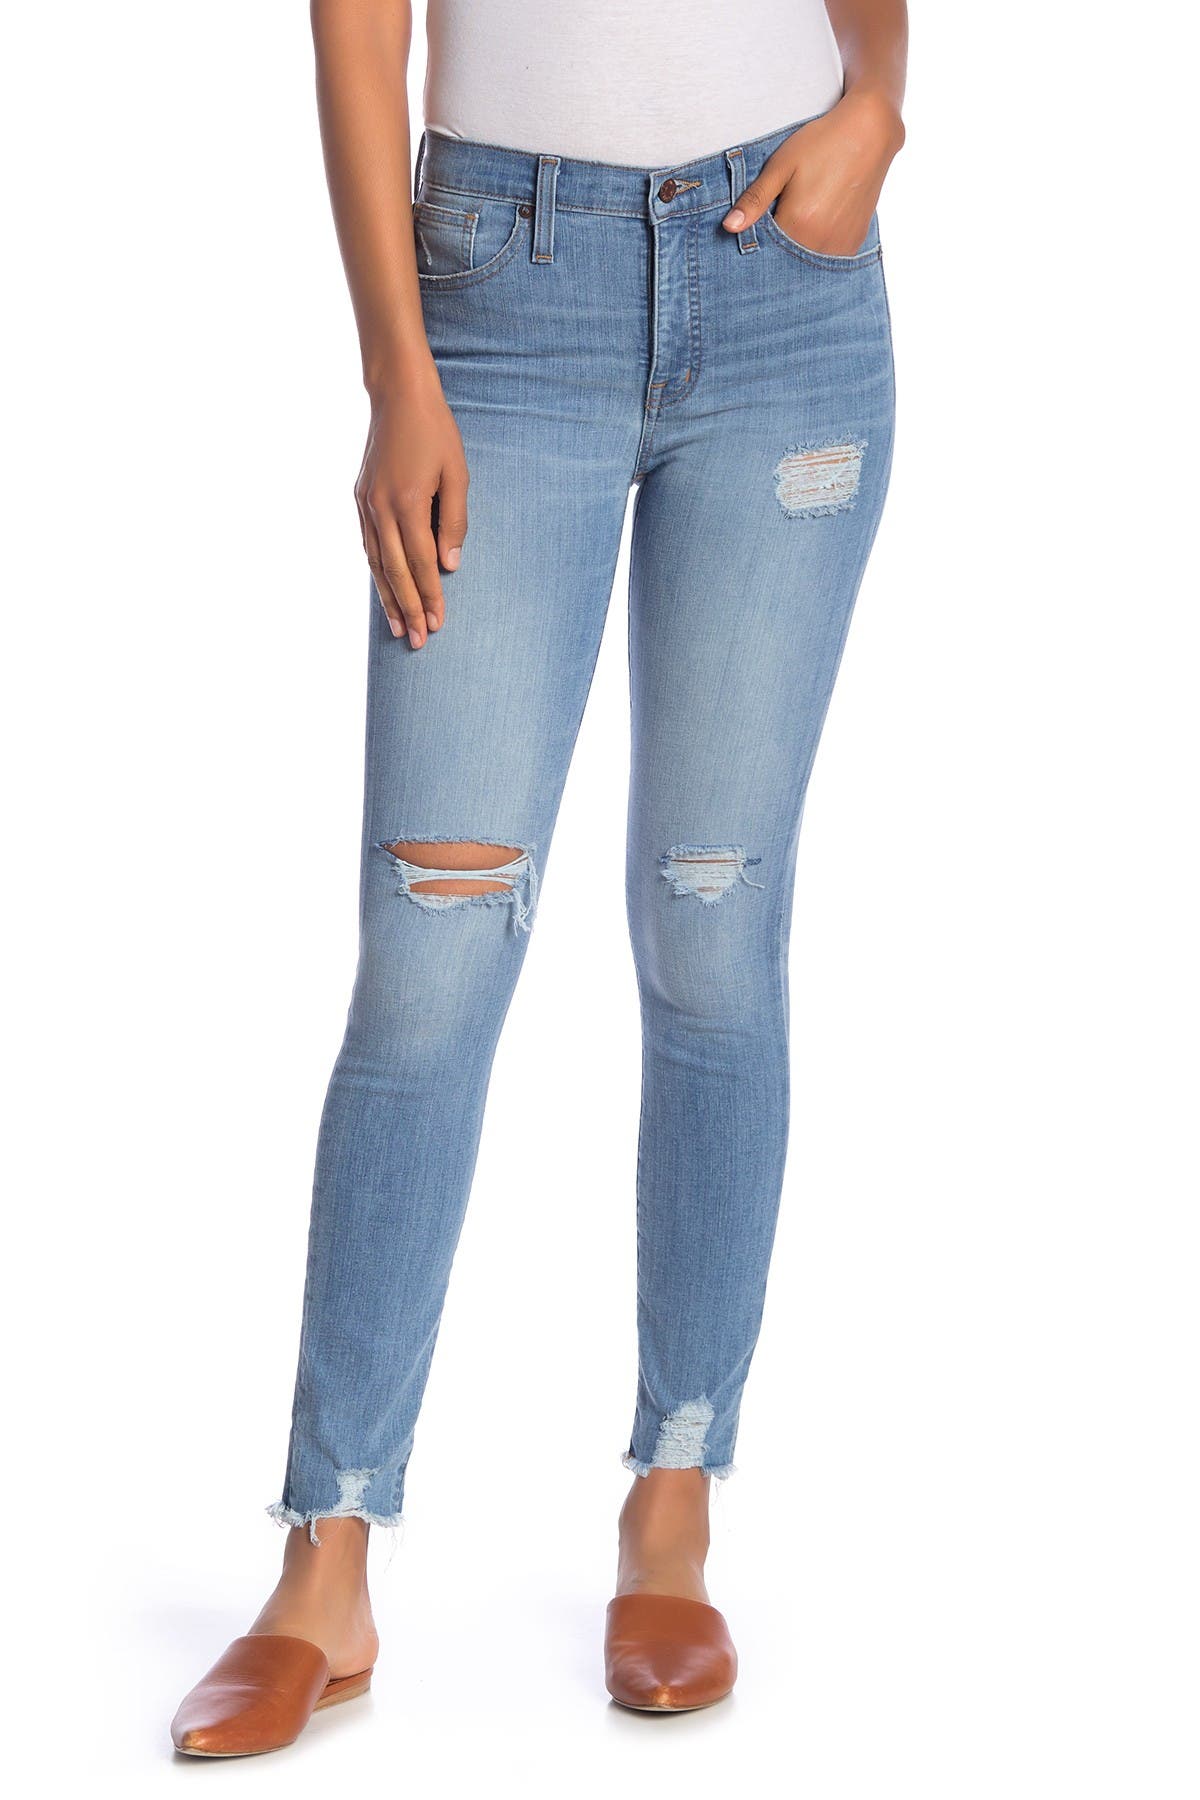 madewell distressed jeans